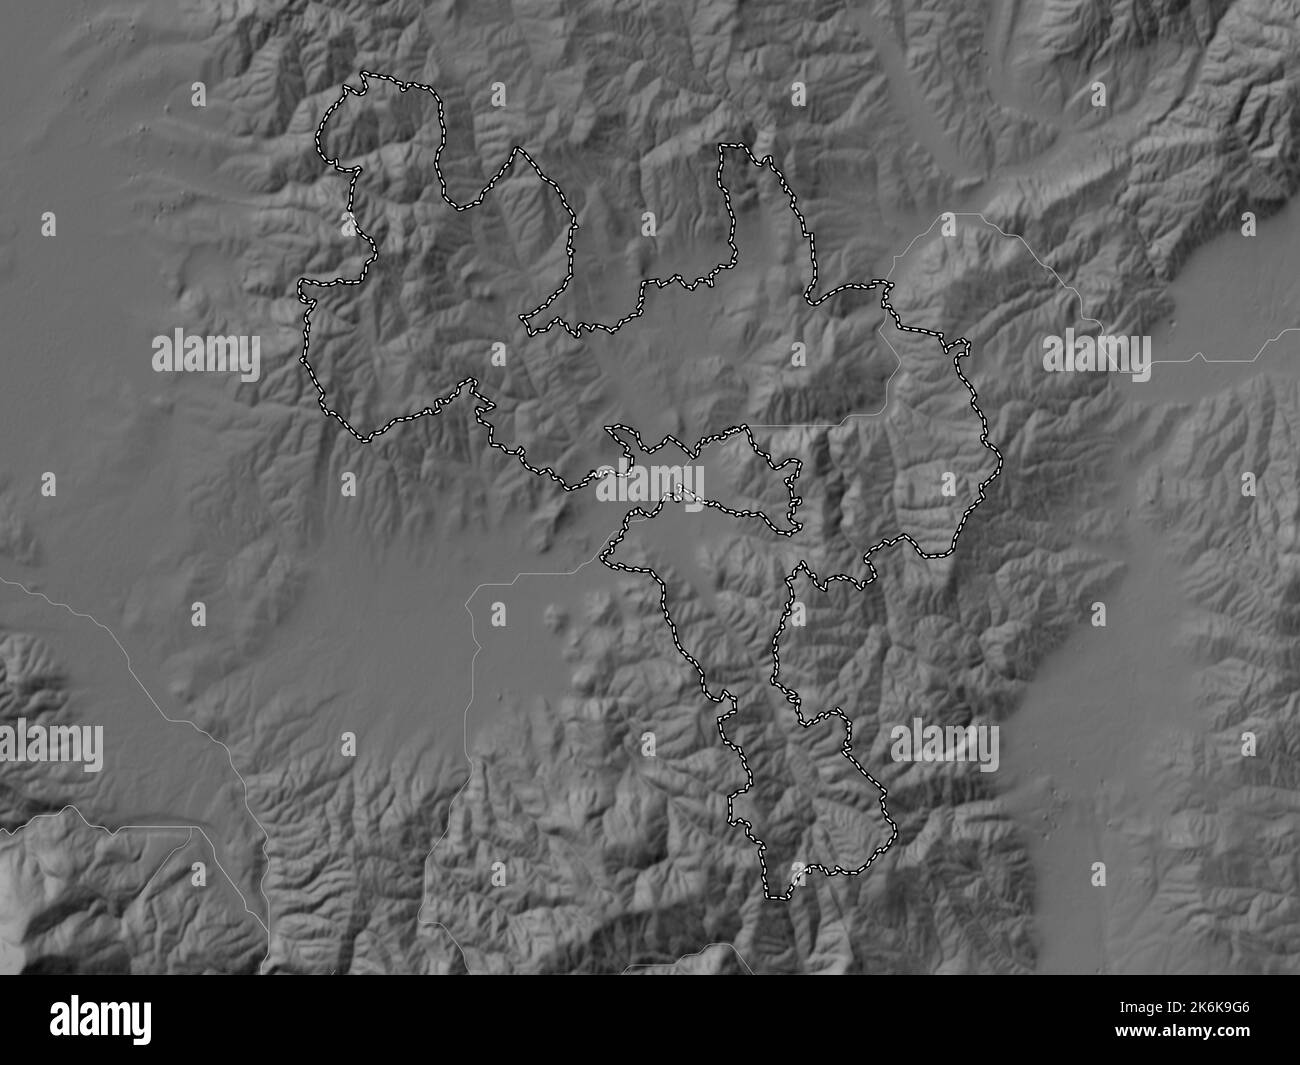 Gjilan, municipality of Kosovo. Grayscale elevation map with lakes and rivers Stock Photo